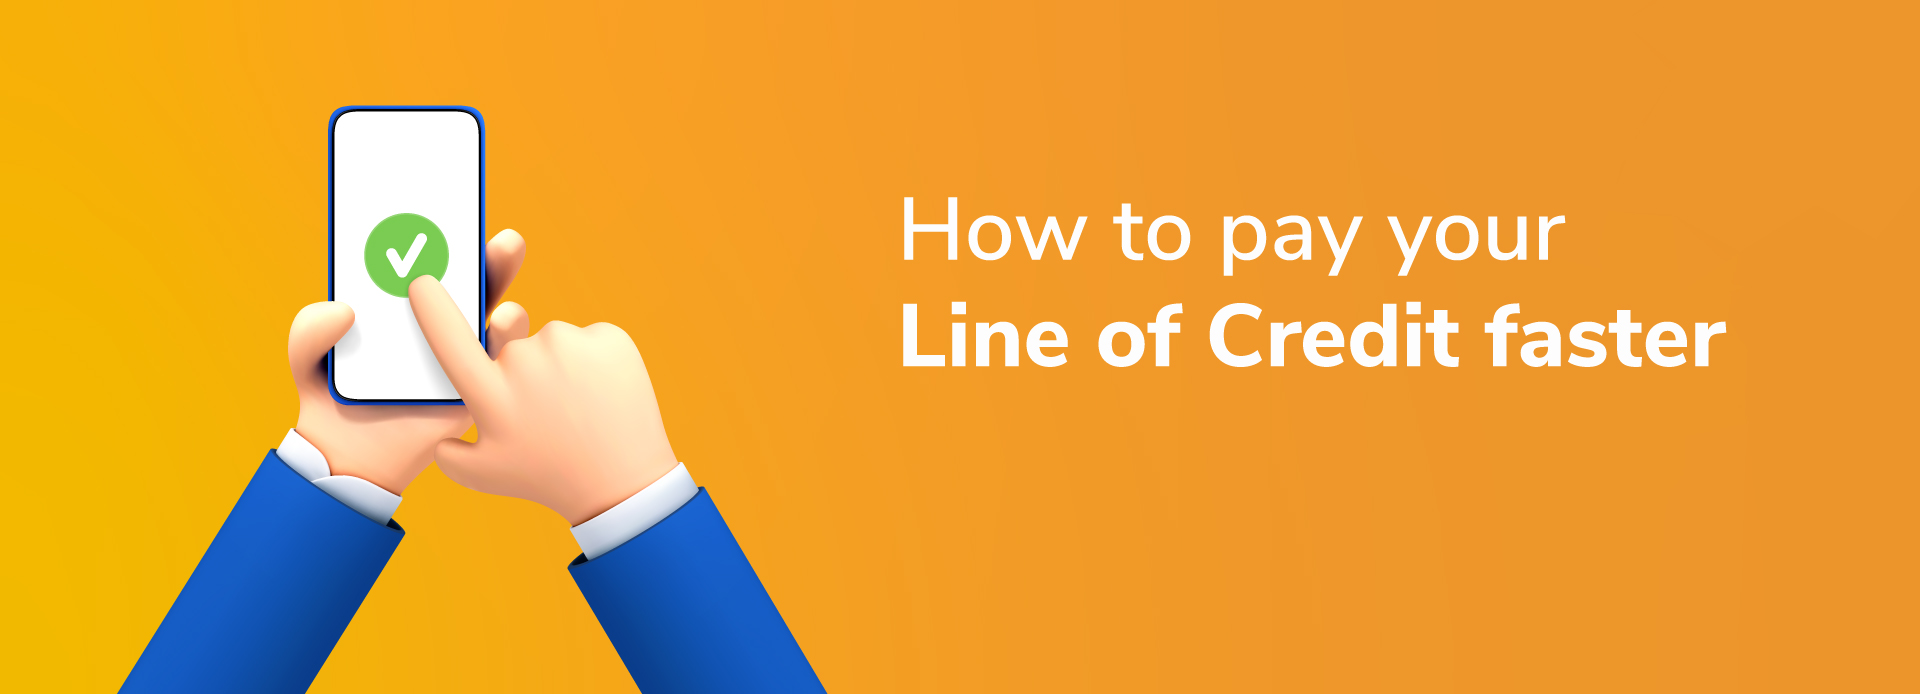 How to pay your line of credit off faster: Tips and tricks